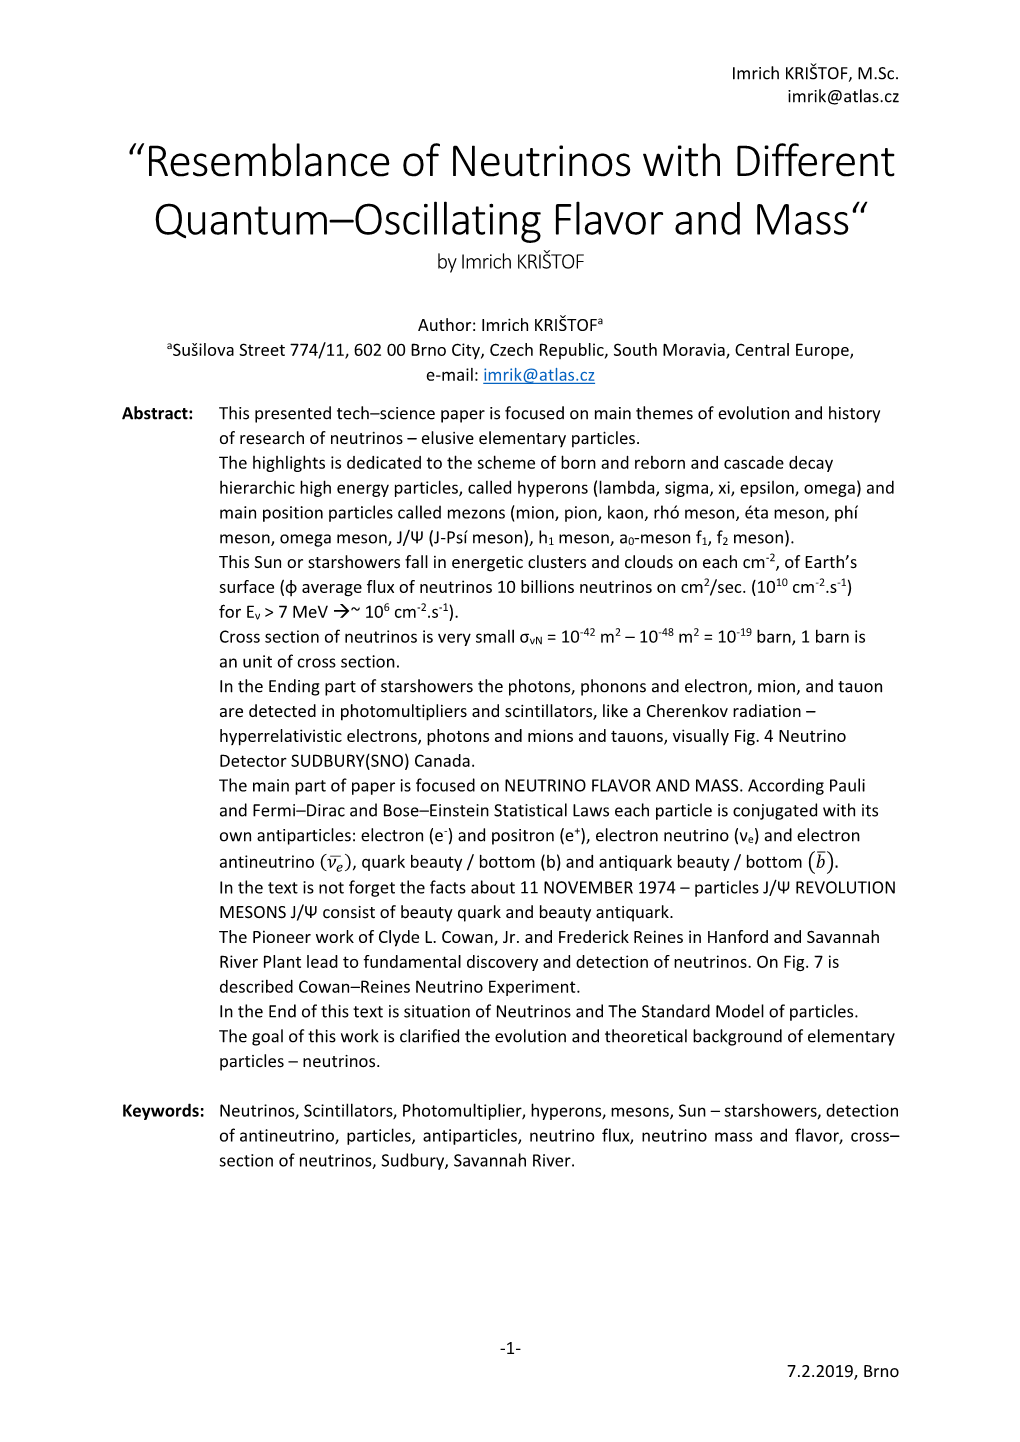 “Resemblance of Neutrinos with Different Quantum–Oscillating Flavor and Mass“ by Imrich KRIŠTOF